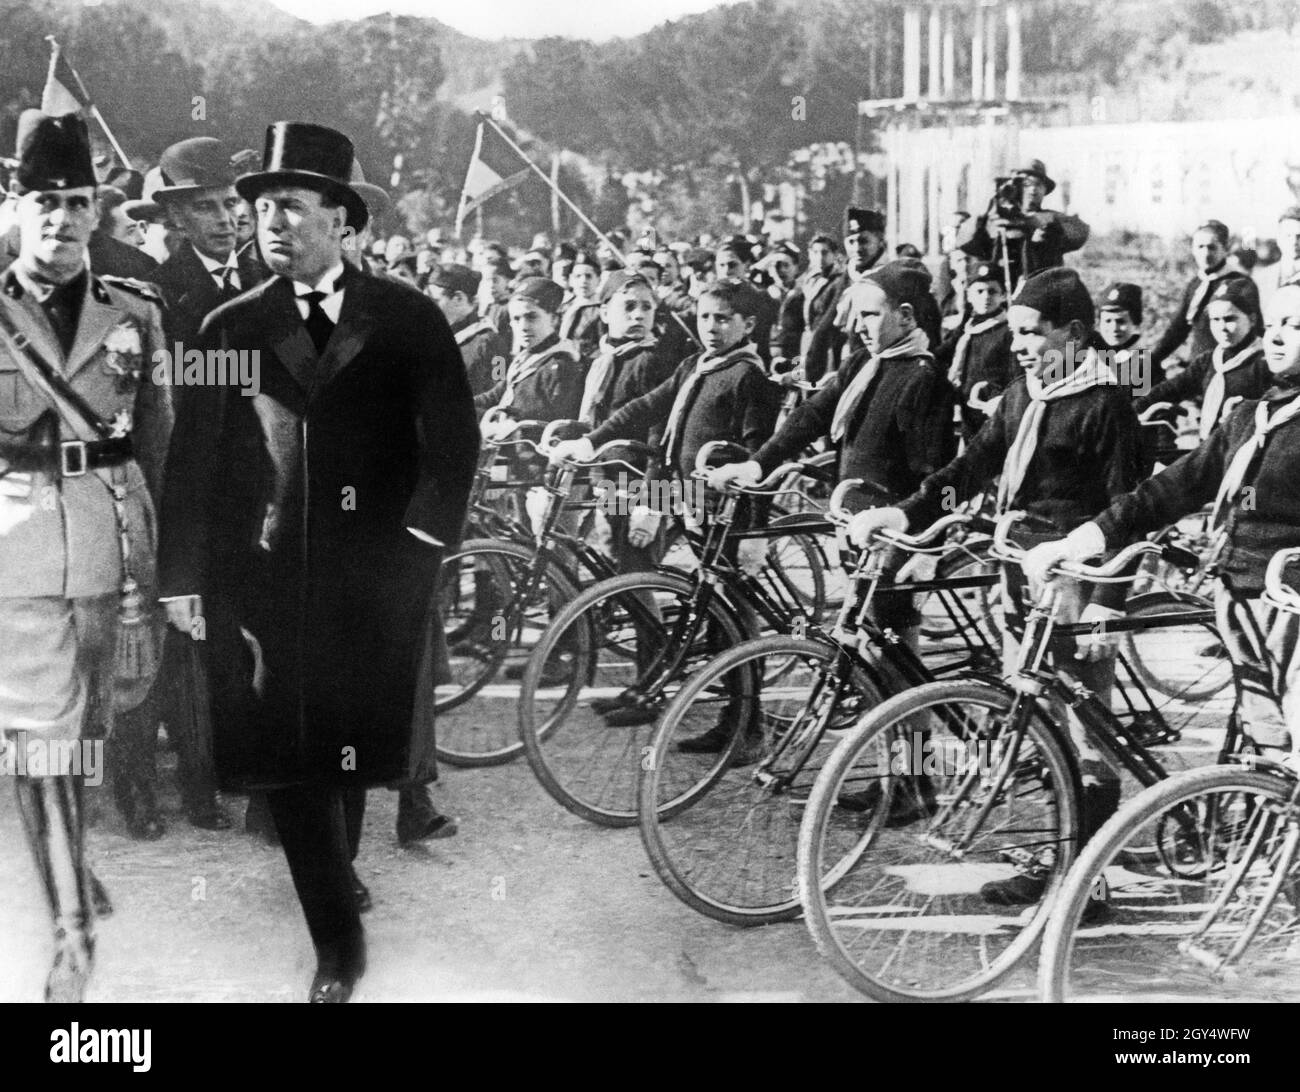 Benito Mussolini (left, in civilian clothes) strides along the front of a bicycle division with officers and guests. The boys belong to the fascist youth organization Opera Nazionale Balilla. Retouched photograph, taken around 1930. [automated translation] Stock Photo